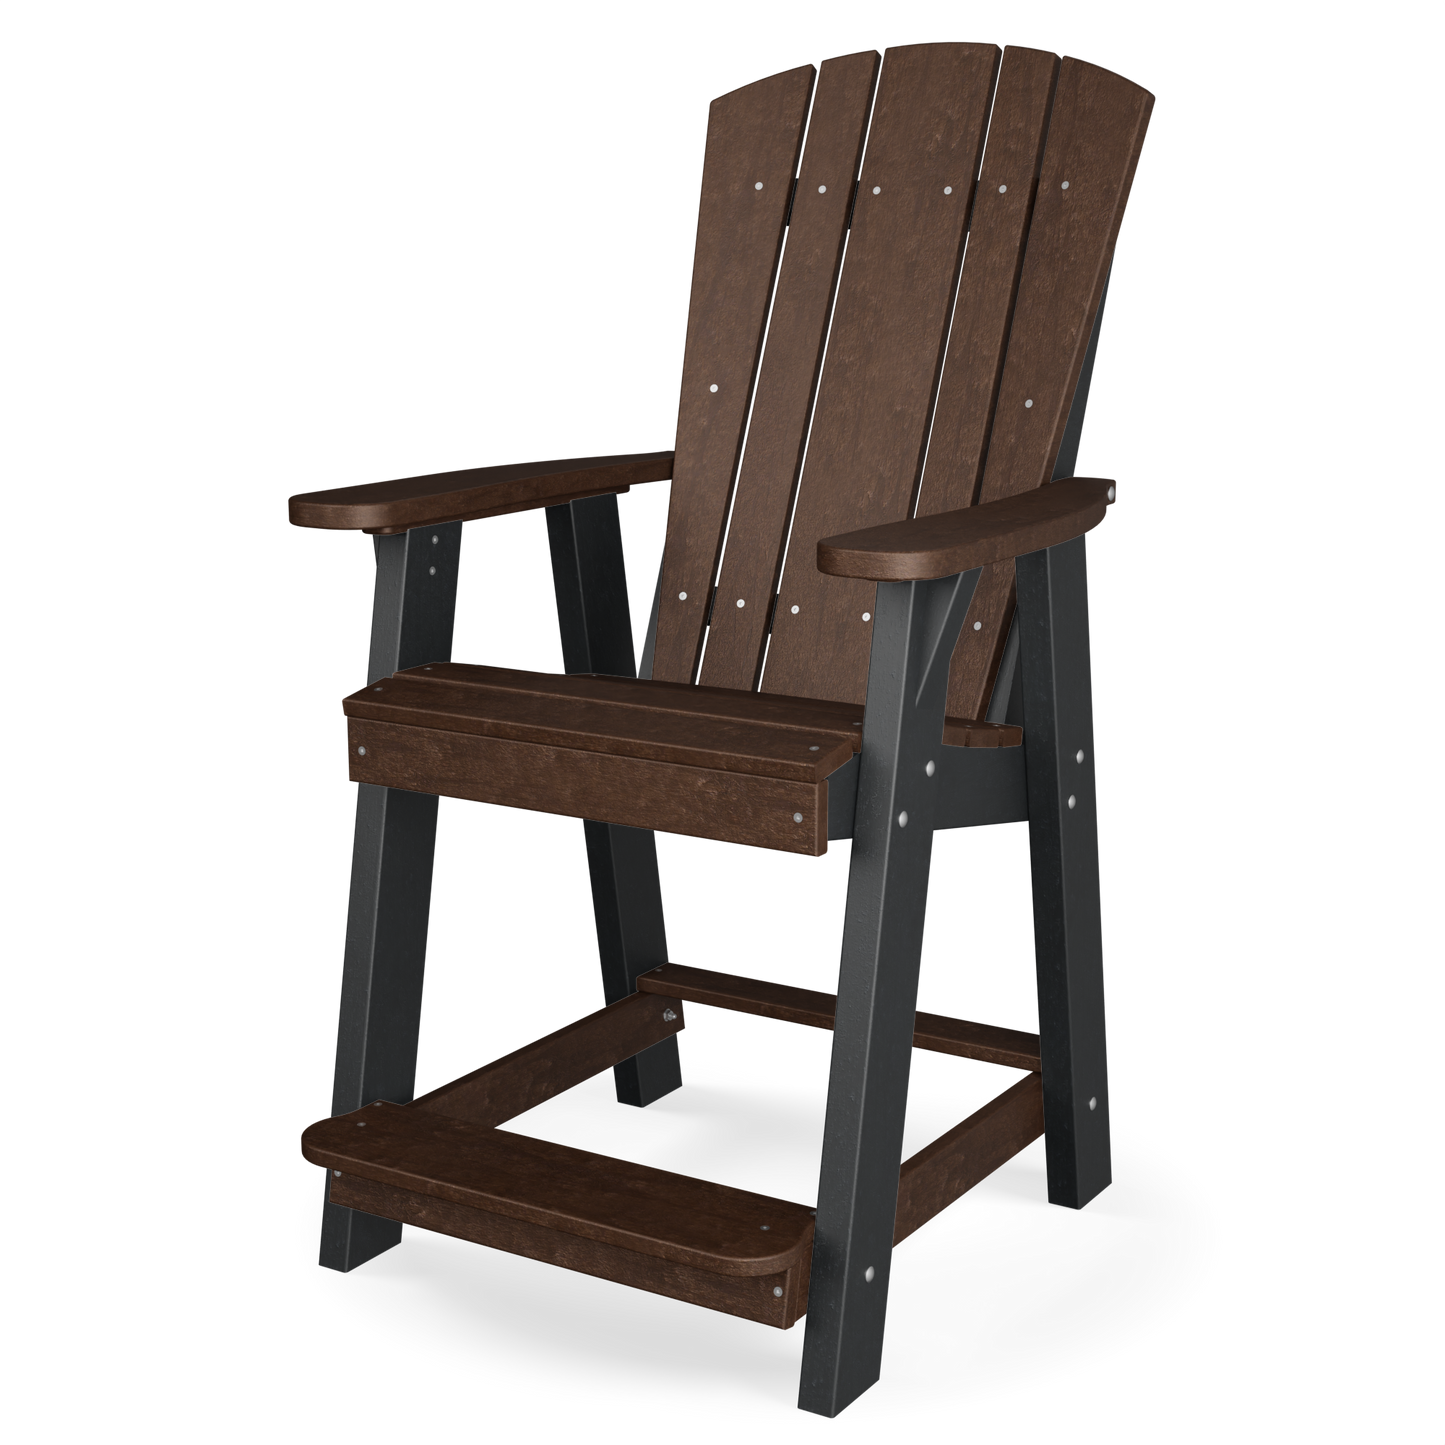 Wildridge Recycled Plastic Heritage Adirondack Balcony Chair (COUNTER HEIGHT) - LEAD TIME TO SHIP 6 WEEKS OR LESS